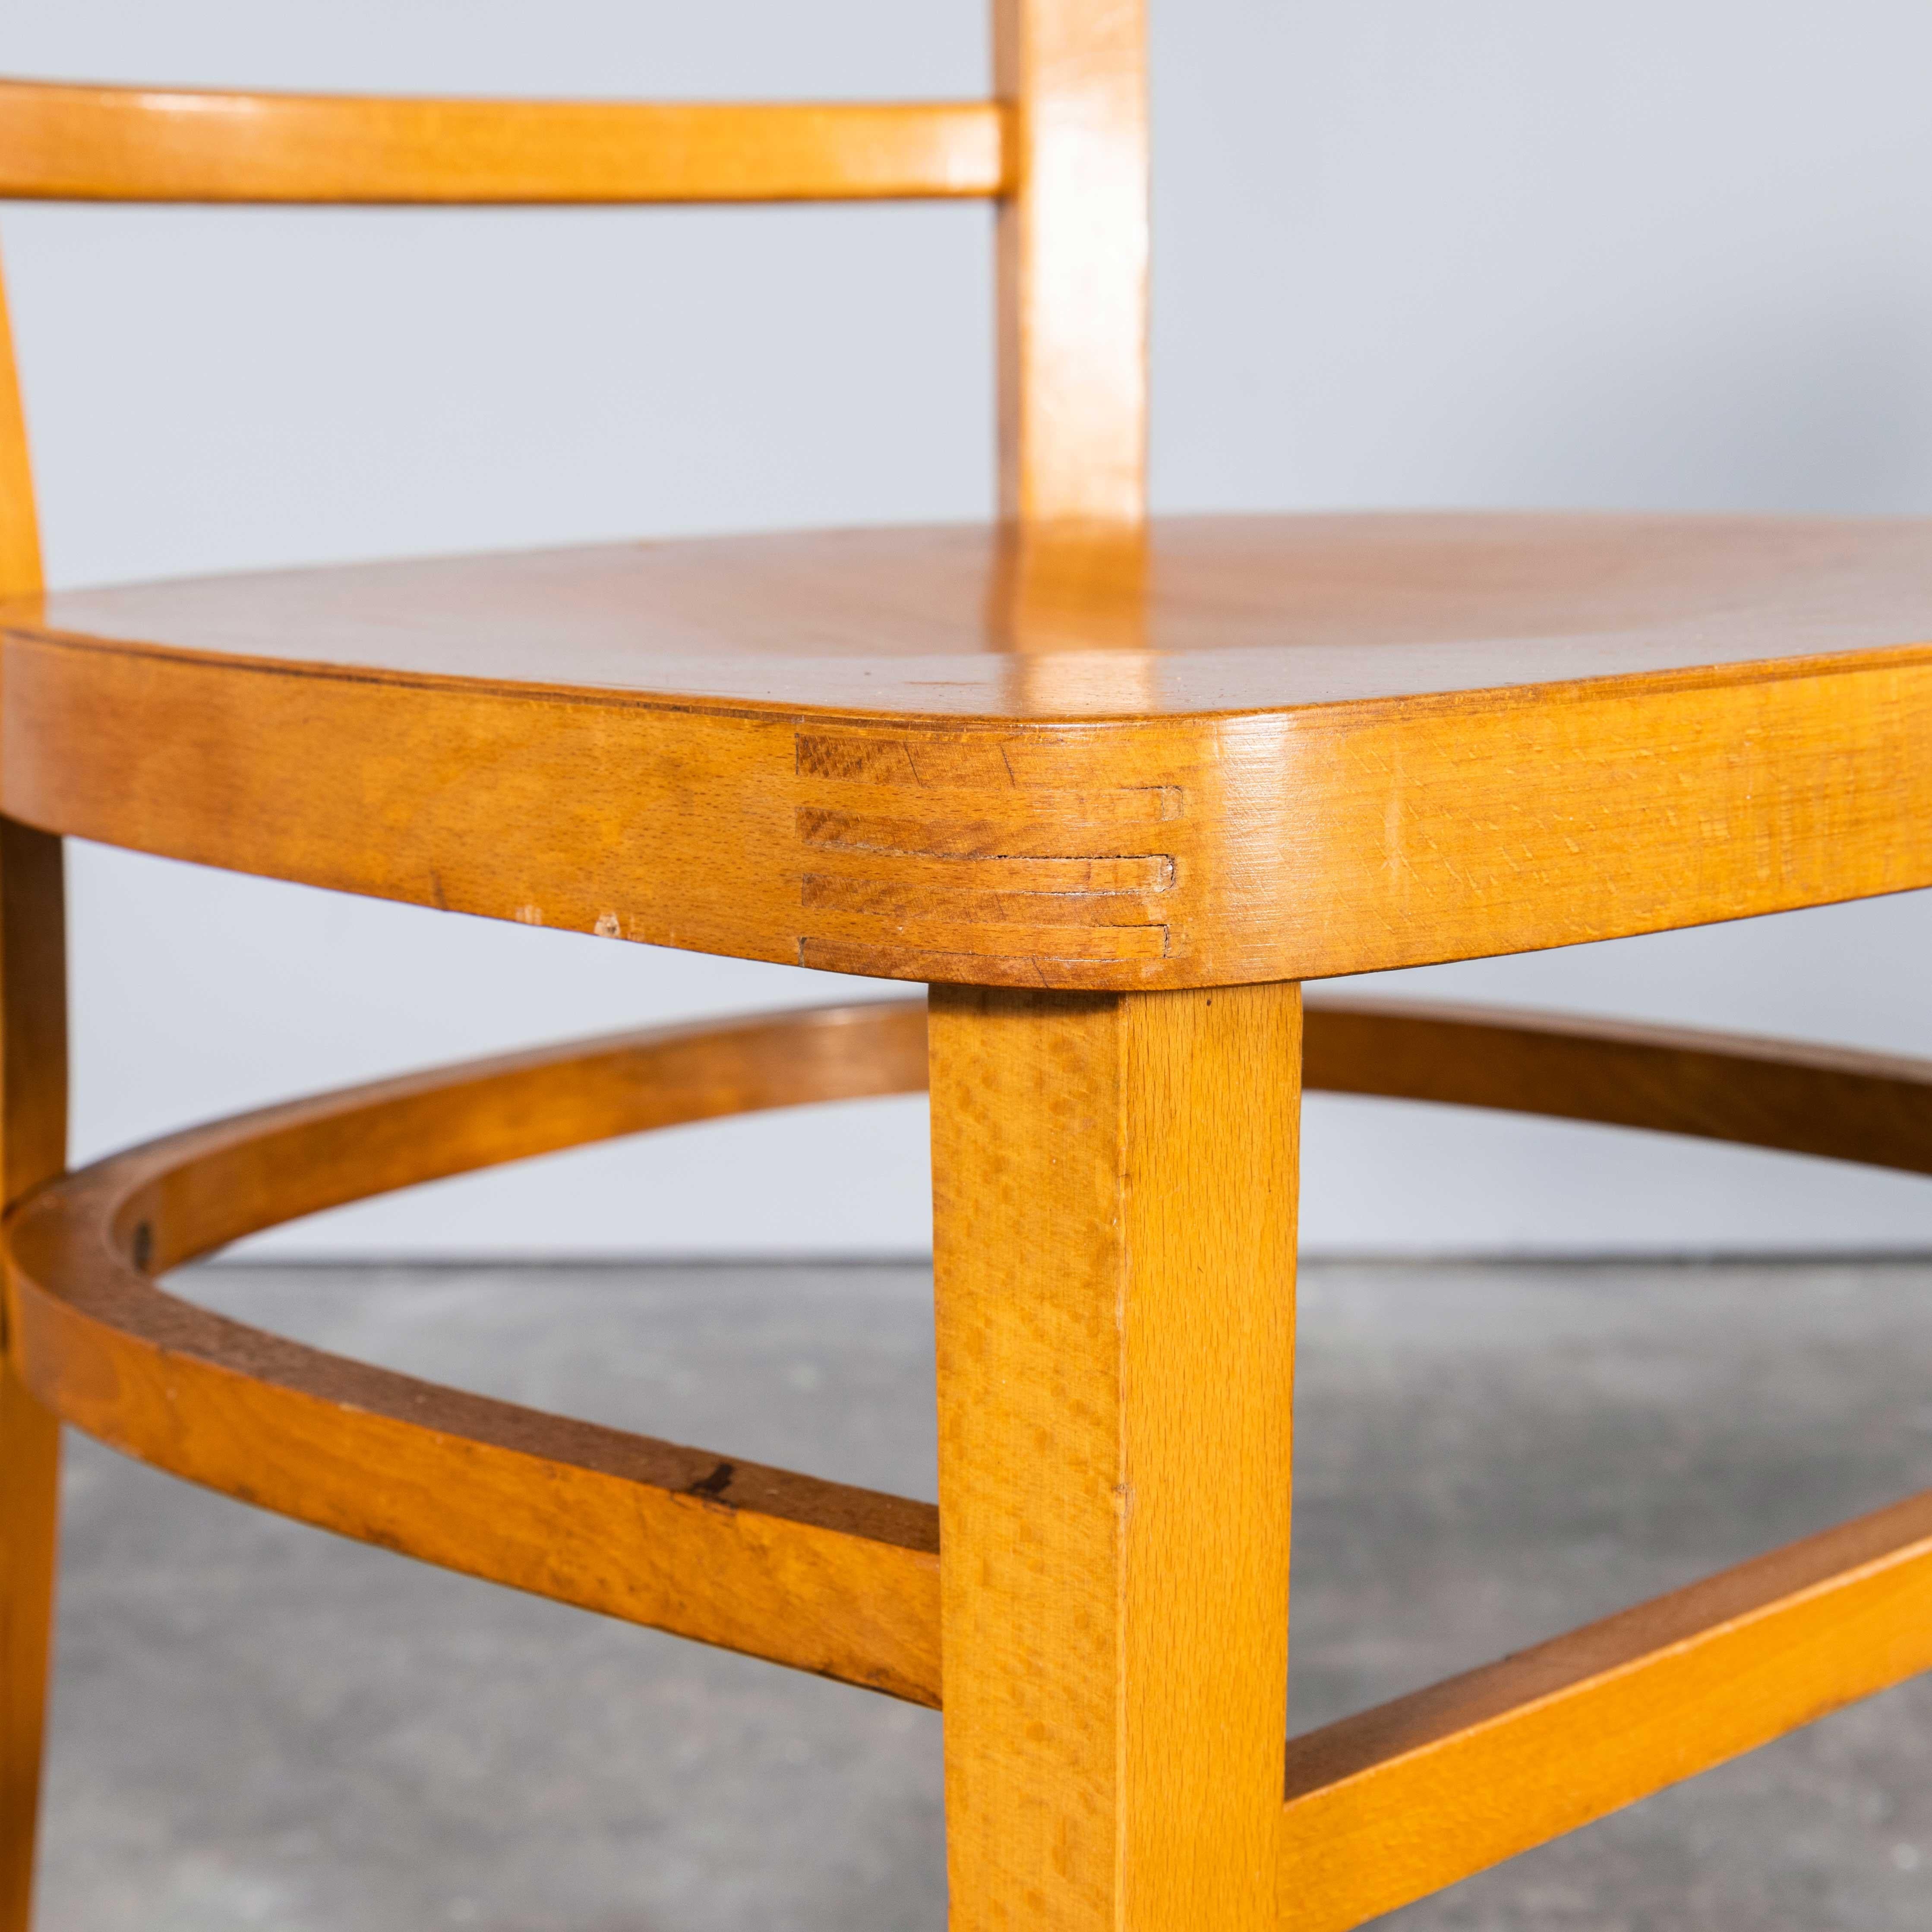 1960’s Clasic Ladder Back Beech Dining Chair – Good Quantity Available
1960’s Classic Ladder Back Beech Dining Chair – Good Quantity Available. Salvaged from a community hall in Lancashire these chairs were originally produced in Romania. A classic